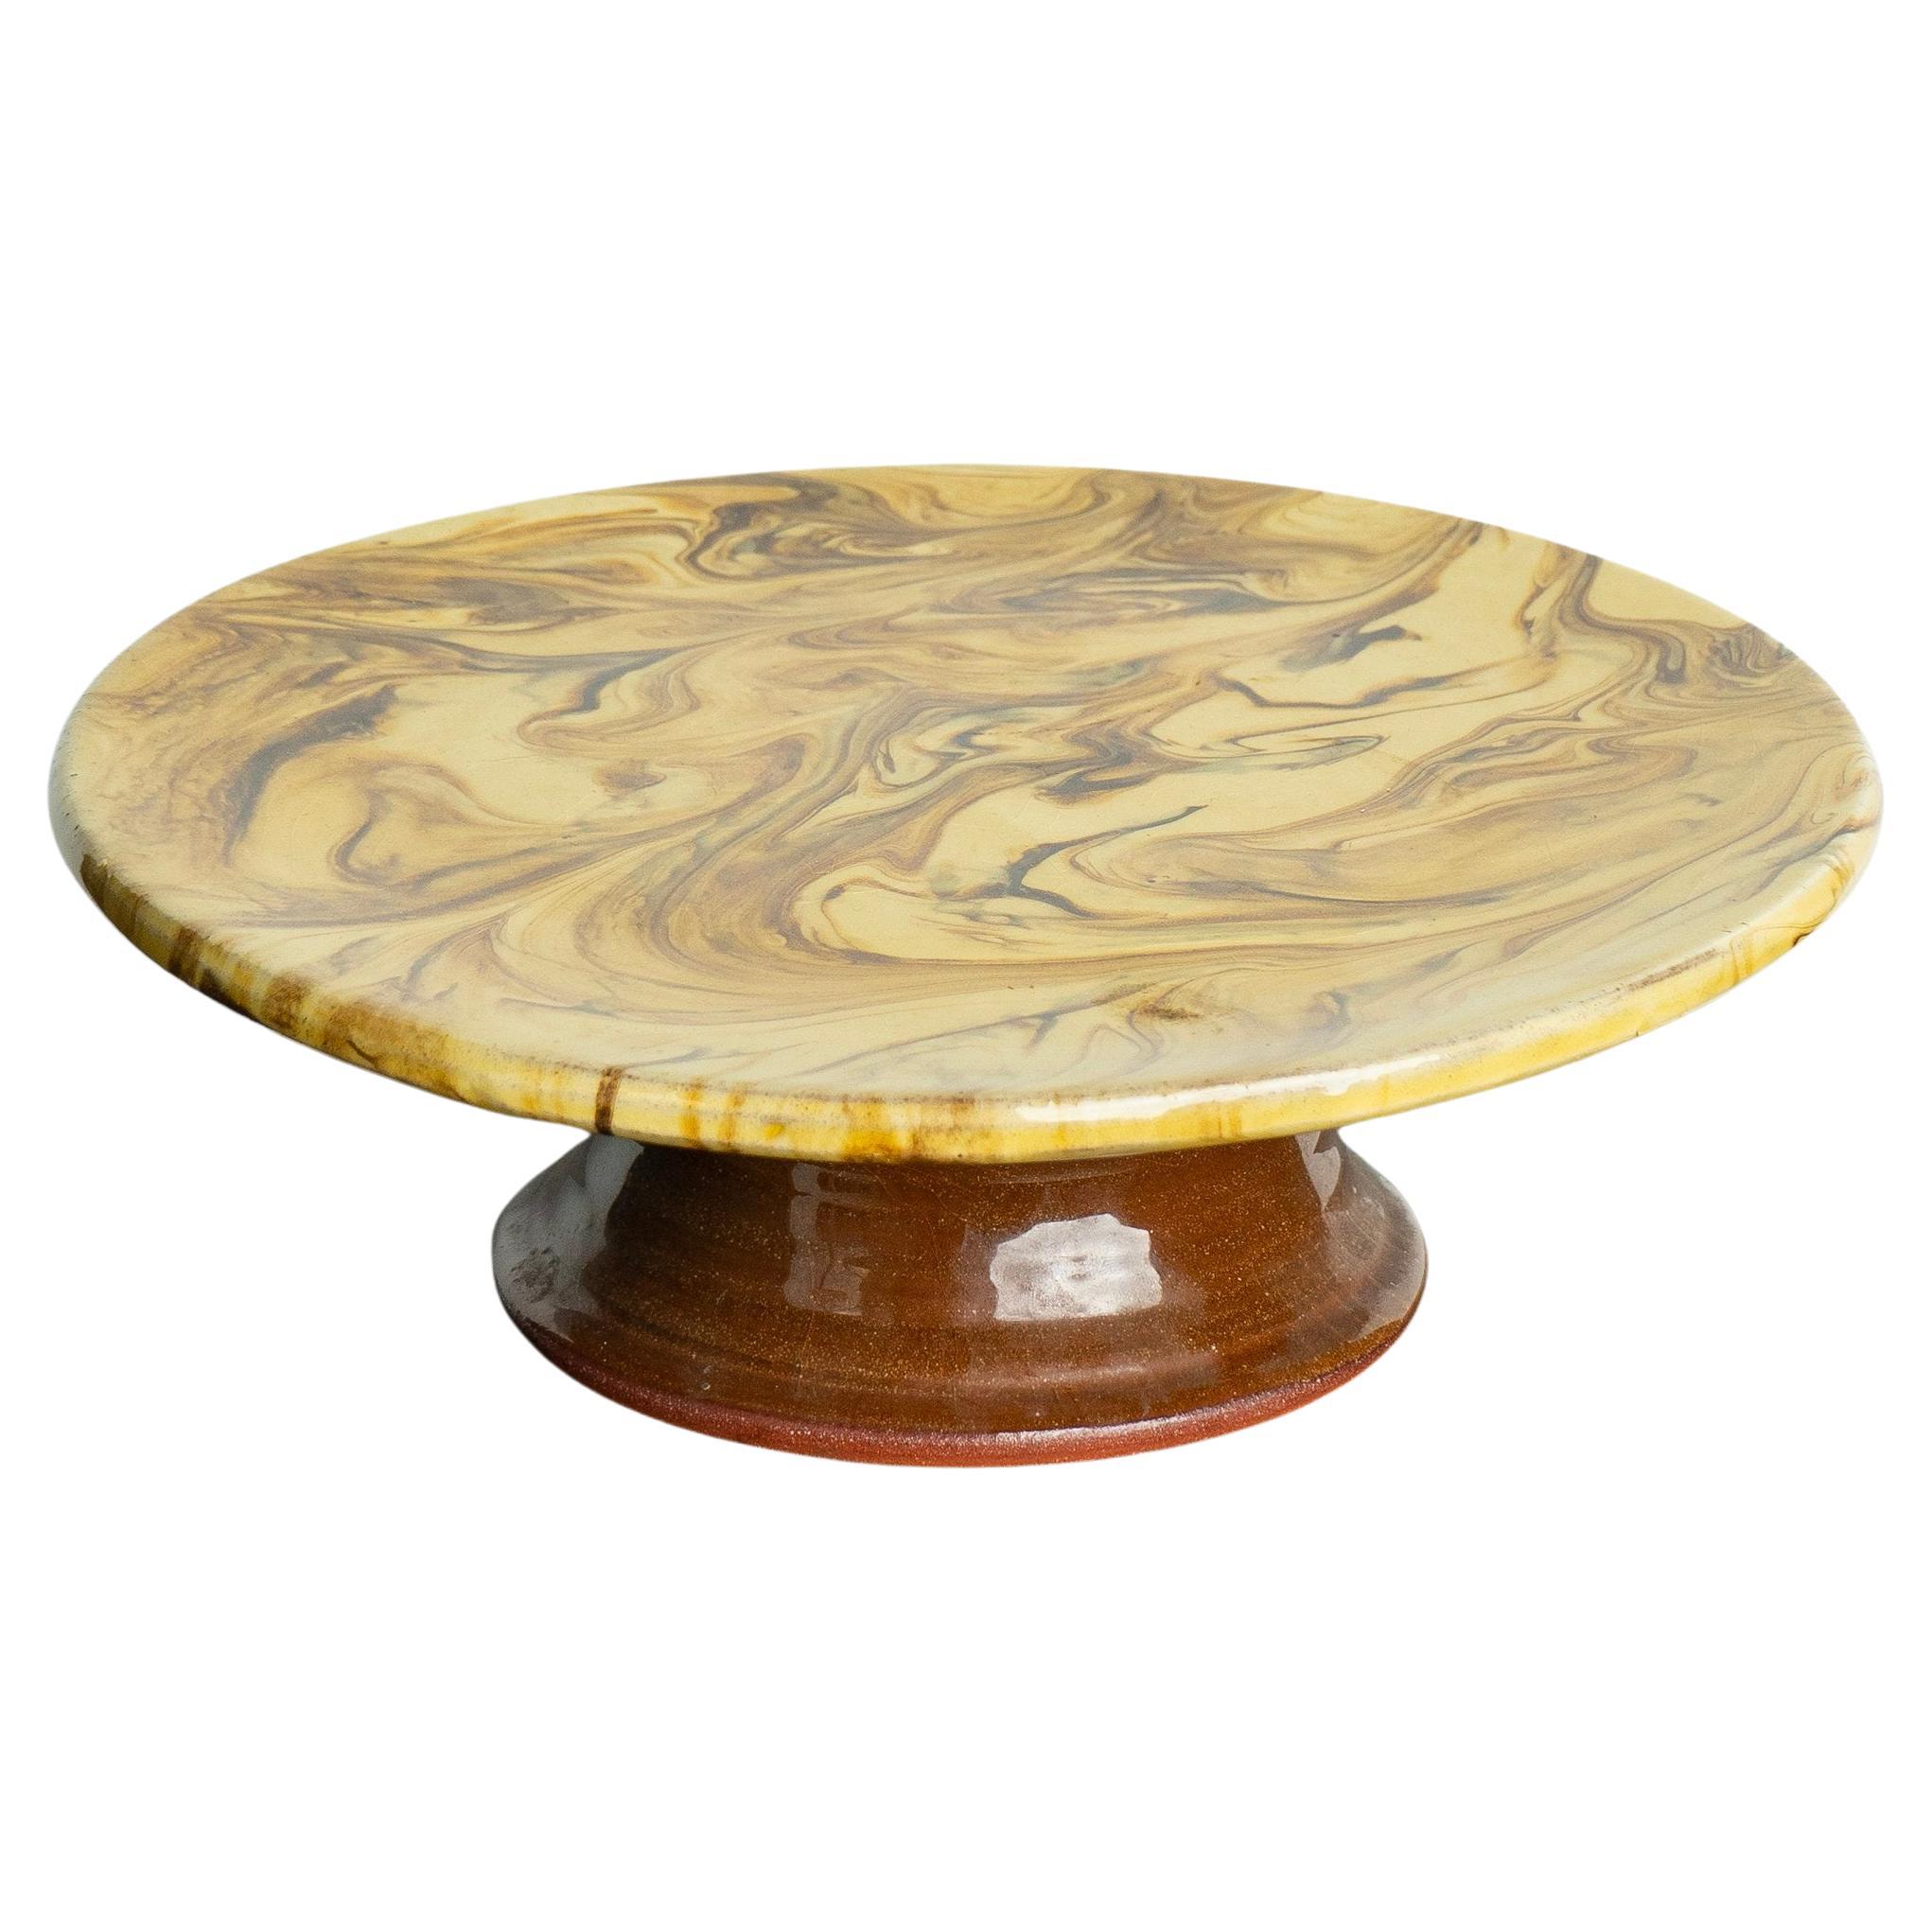 Buckley Pottery Agate Ware Cake Stand, Early 20th Century For Sale